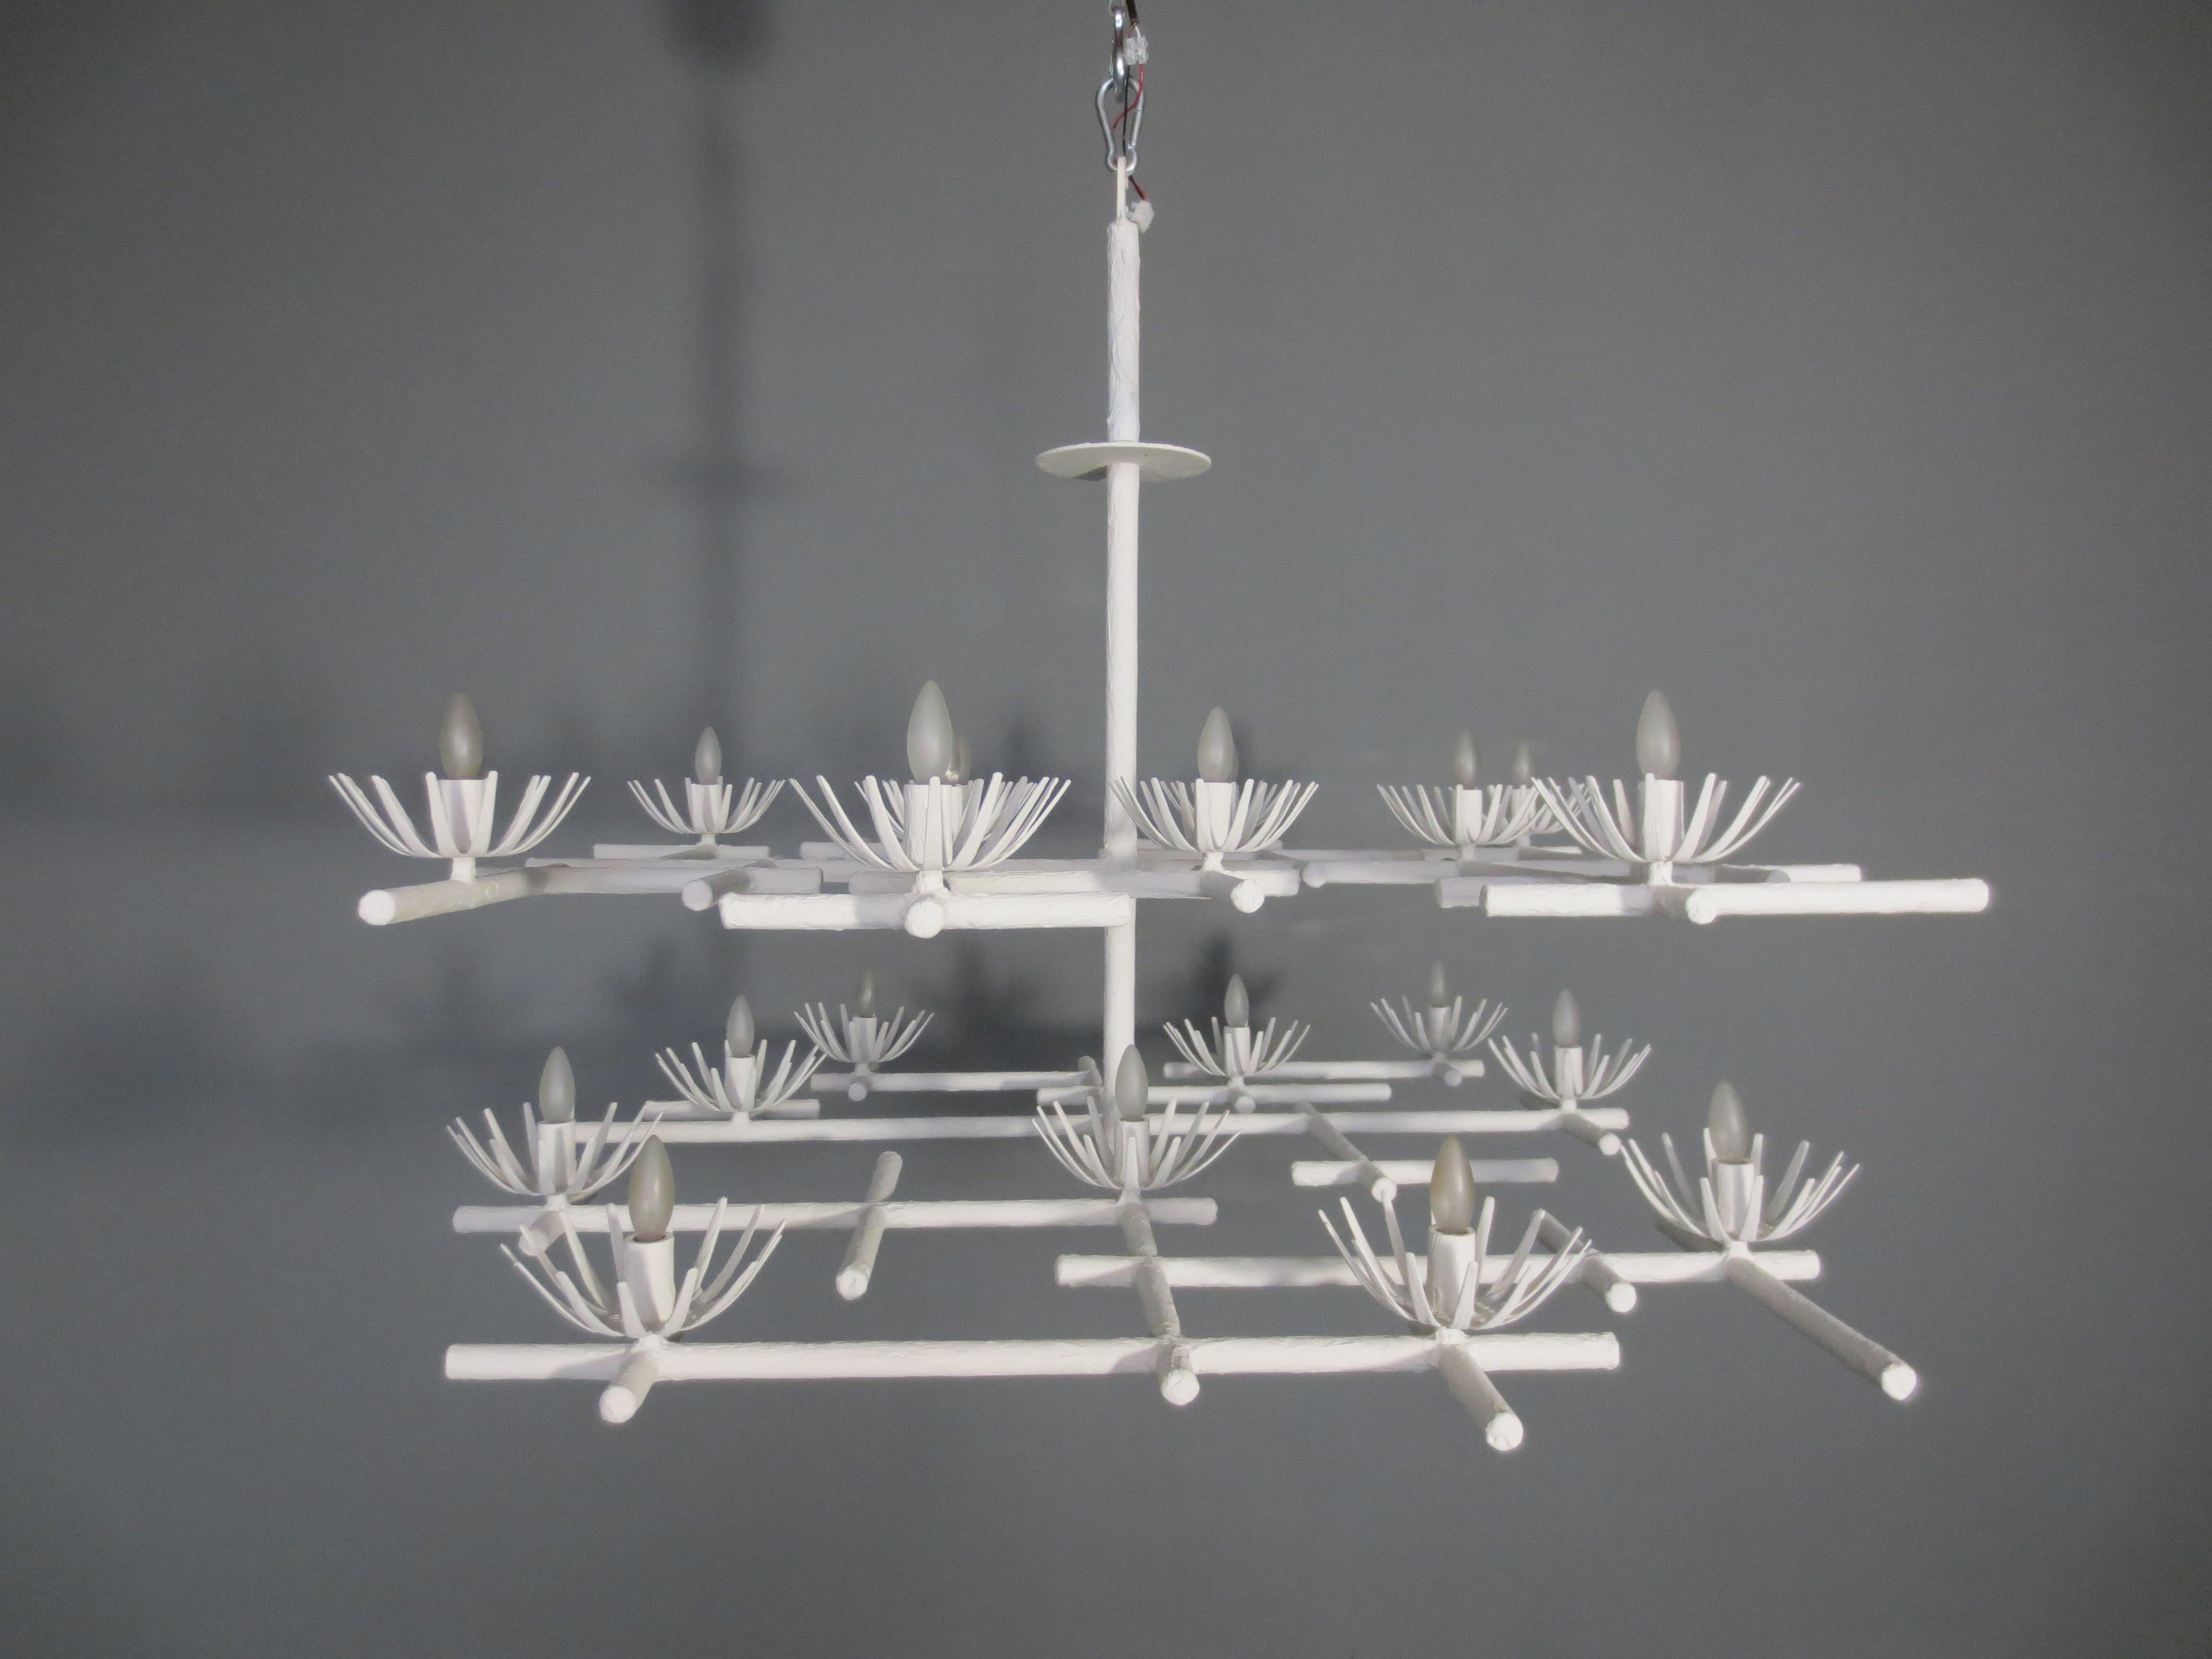 Starburst Chandelier by Tracey Garet of Apsara Interior Design. Multi layered chandelier with 16 candelabra lights coming out of starbursts. The piece shown is in white plaster. . The fabrication is plaster over steel tubing. All Apsara Lighting